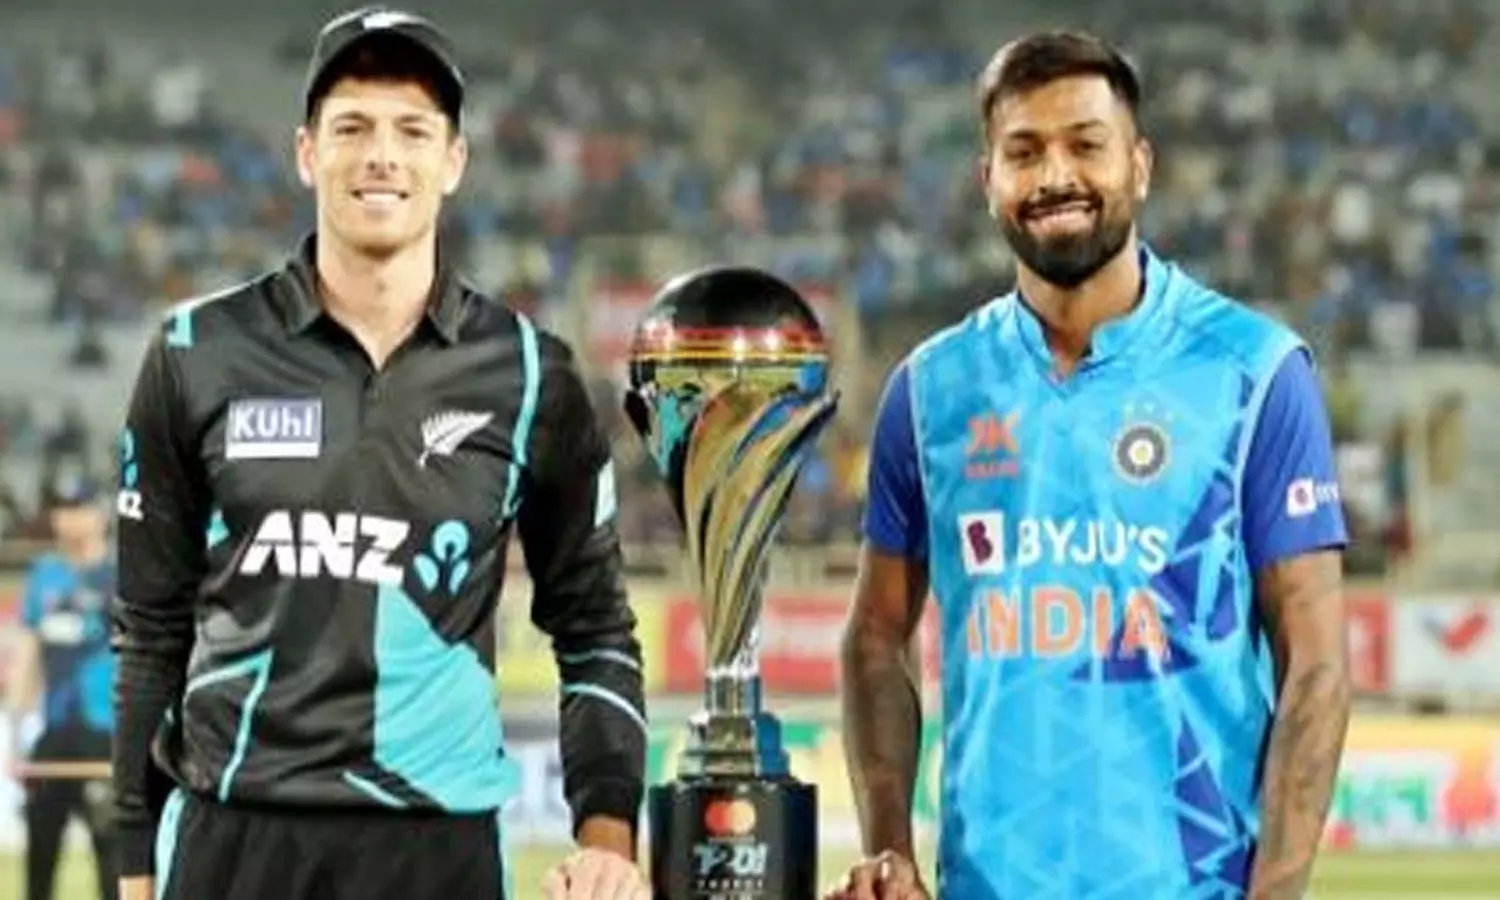 India Vs New Zealand, 2nd T20 Cricket Match Today